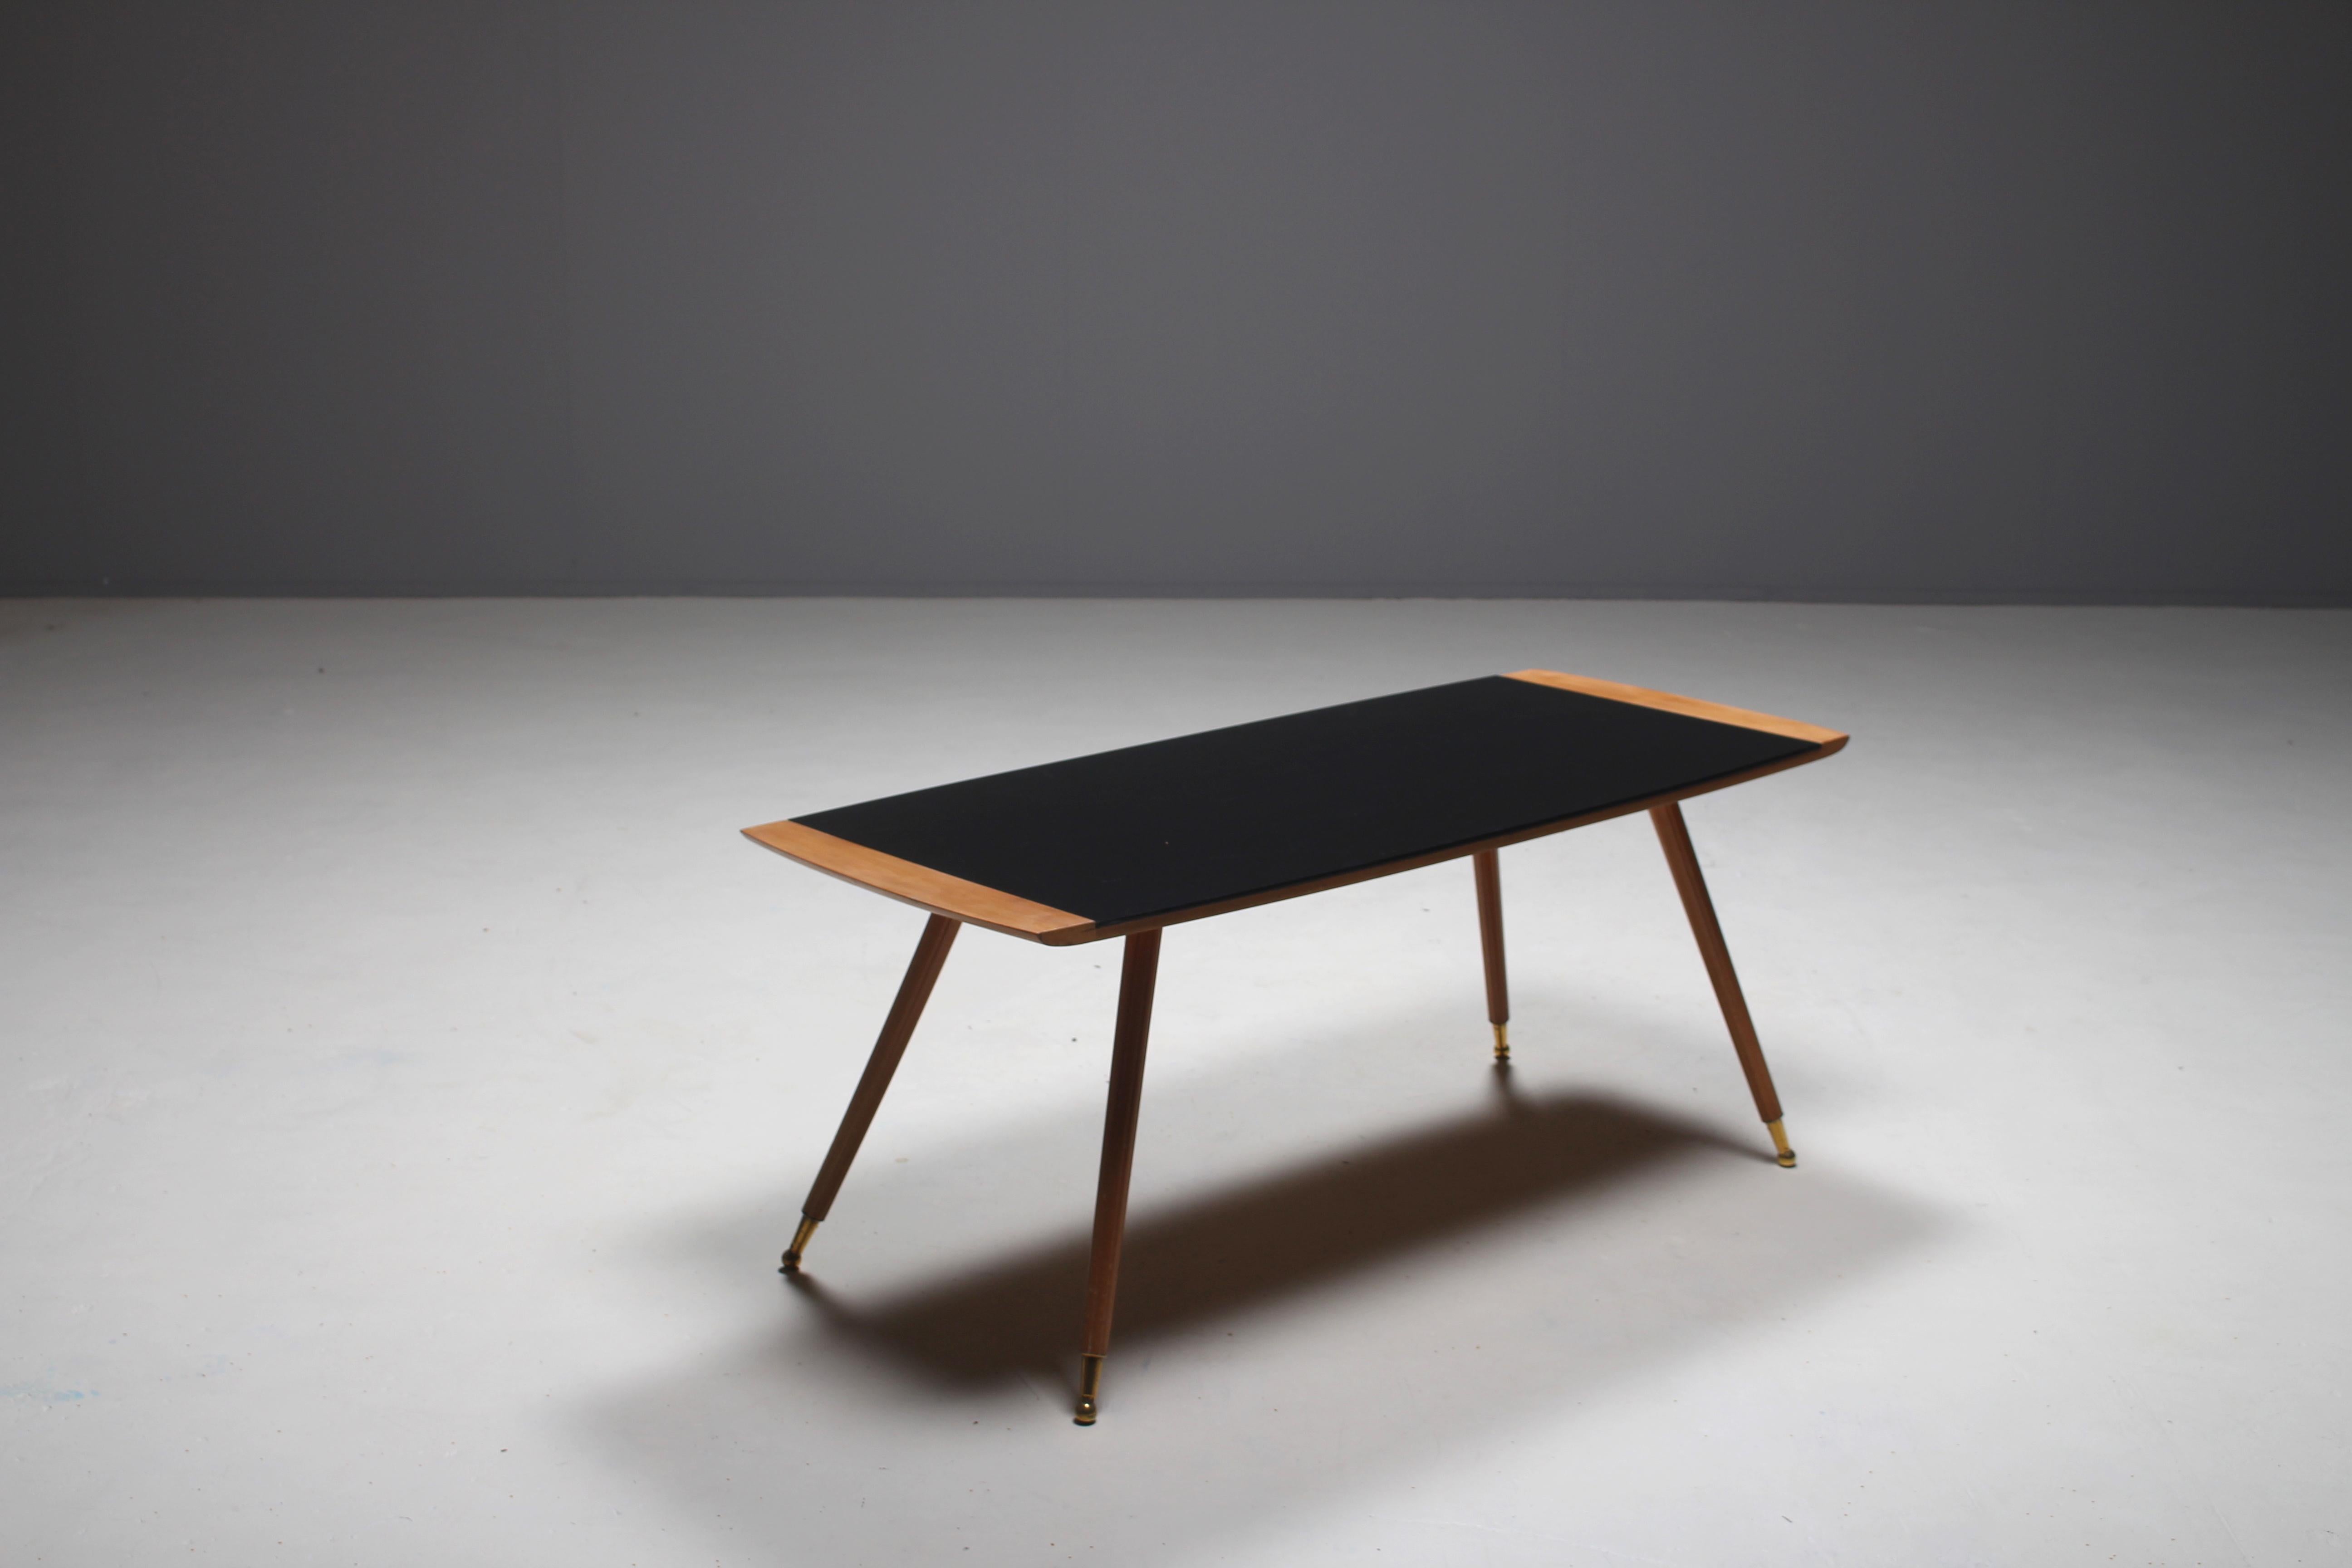 Large Italian coffee table in the manner of Paolo Buffa and Gio Ponti.
The table is made out of beechwood and has brass feet.
Black glass is on top of the table and makes a nice contrast with the light wood and brass feet.
  